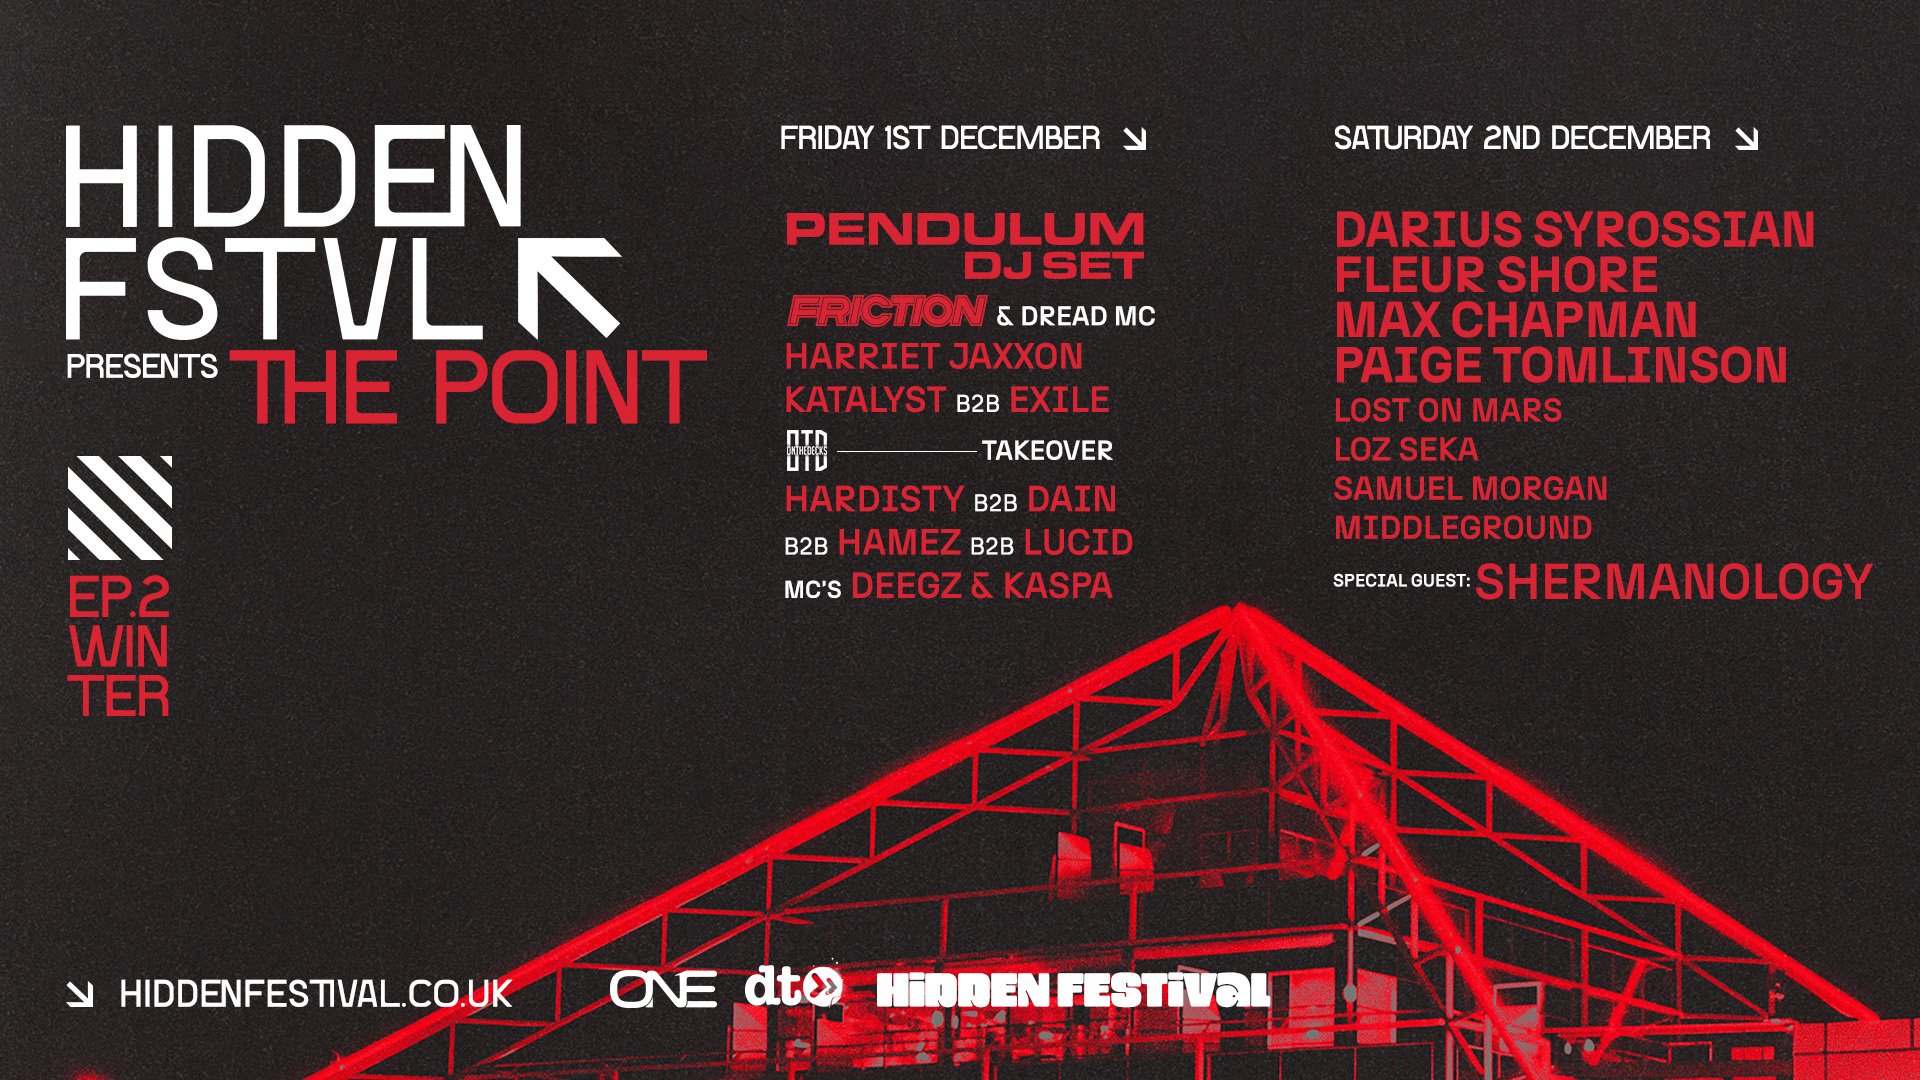 Hidden Festival returns for winter edition at The Point